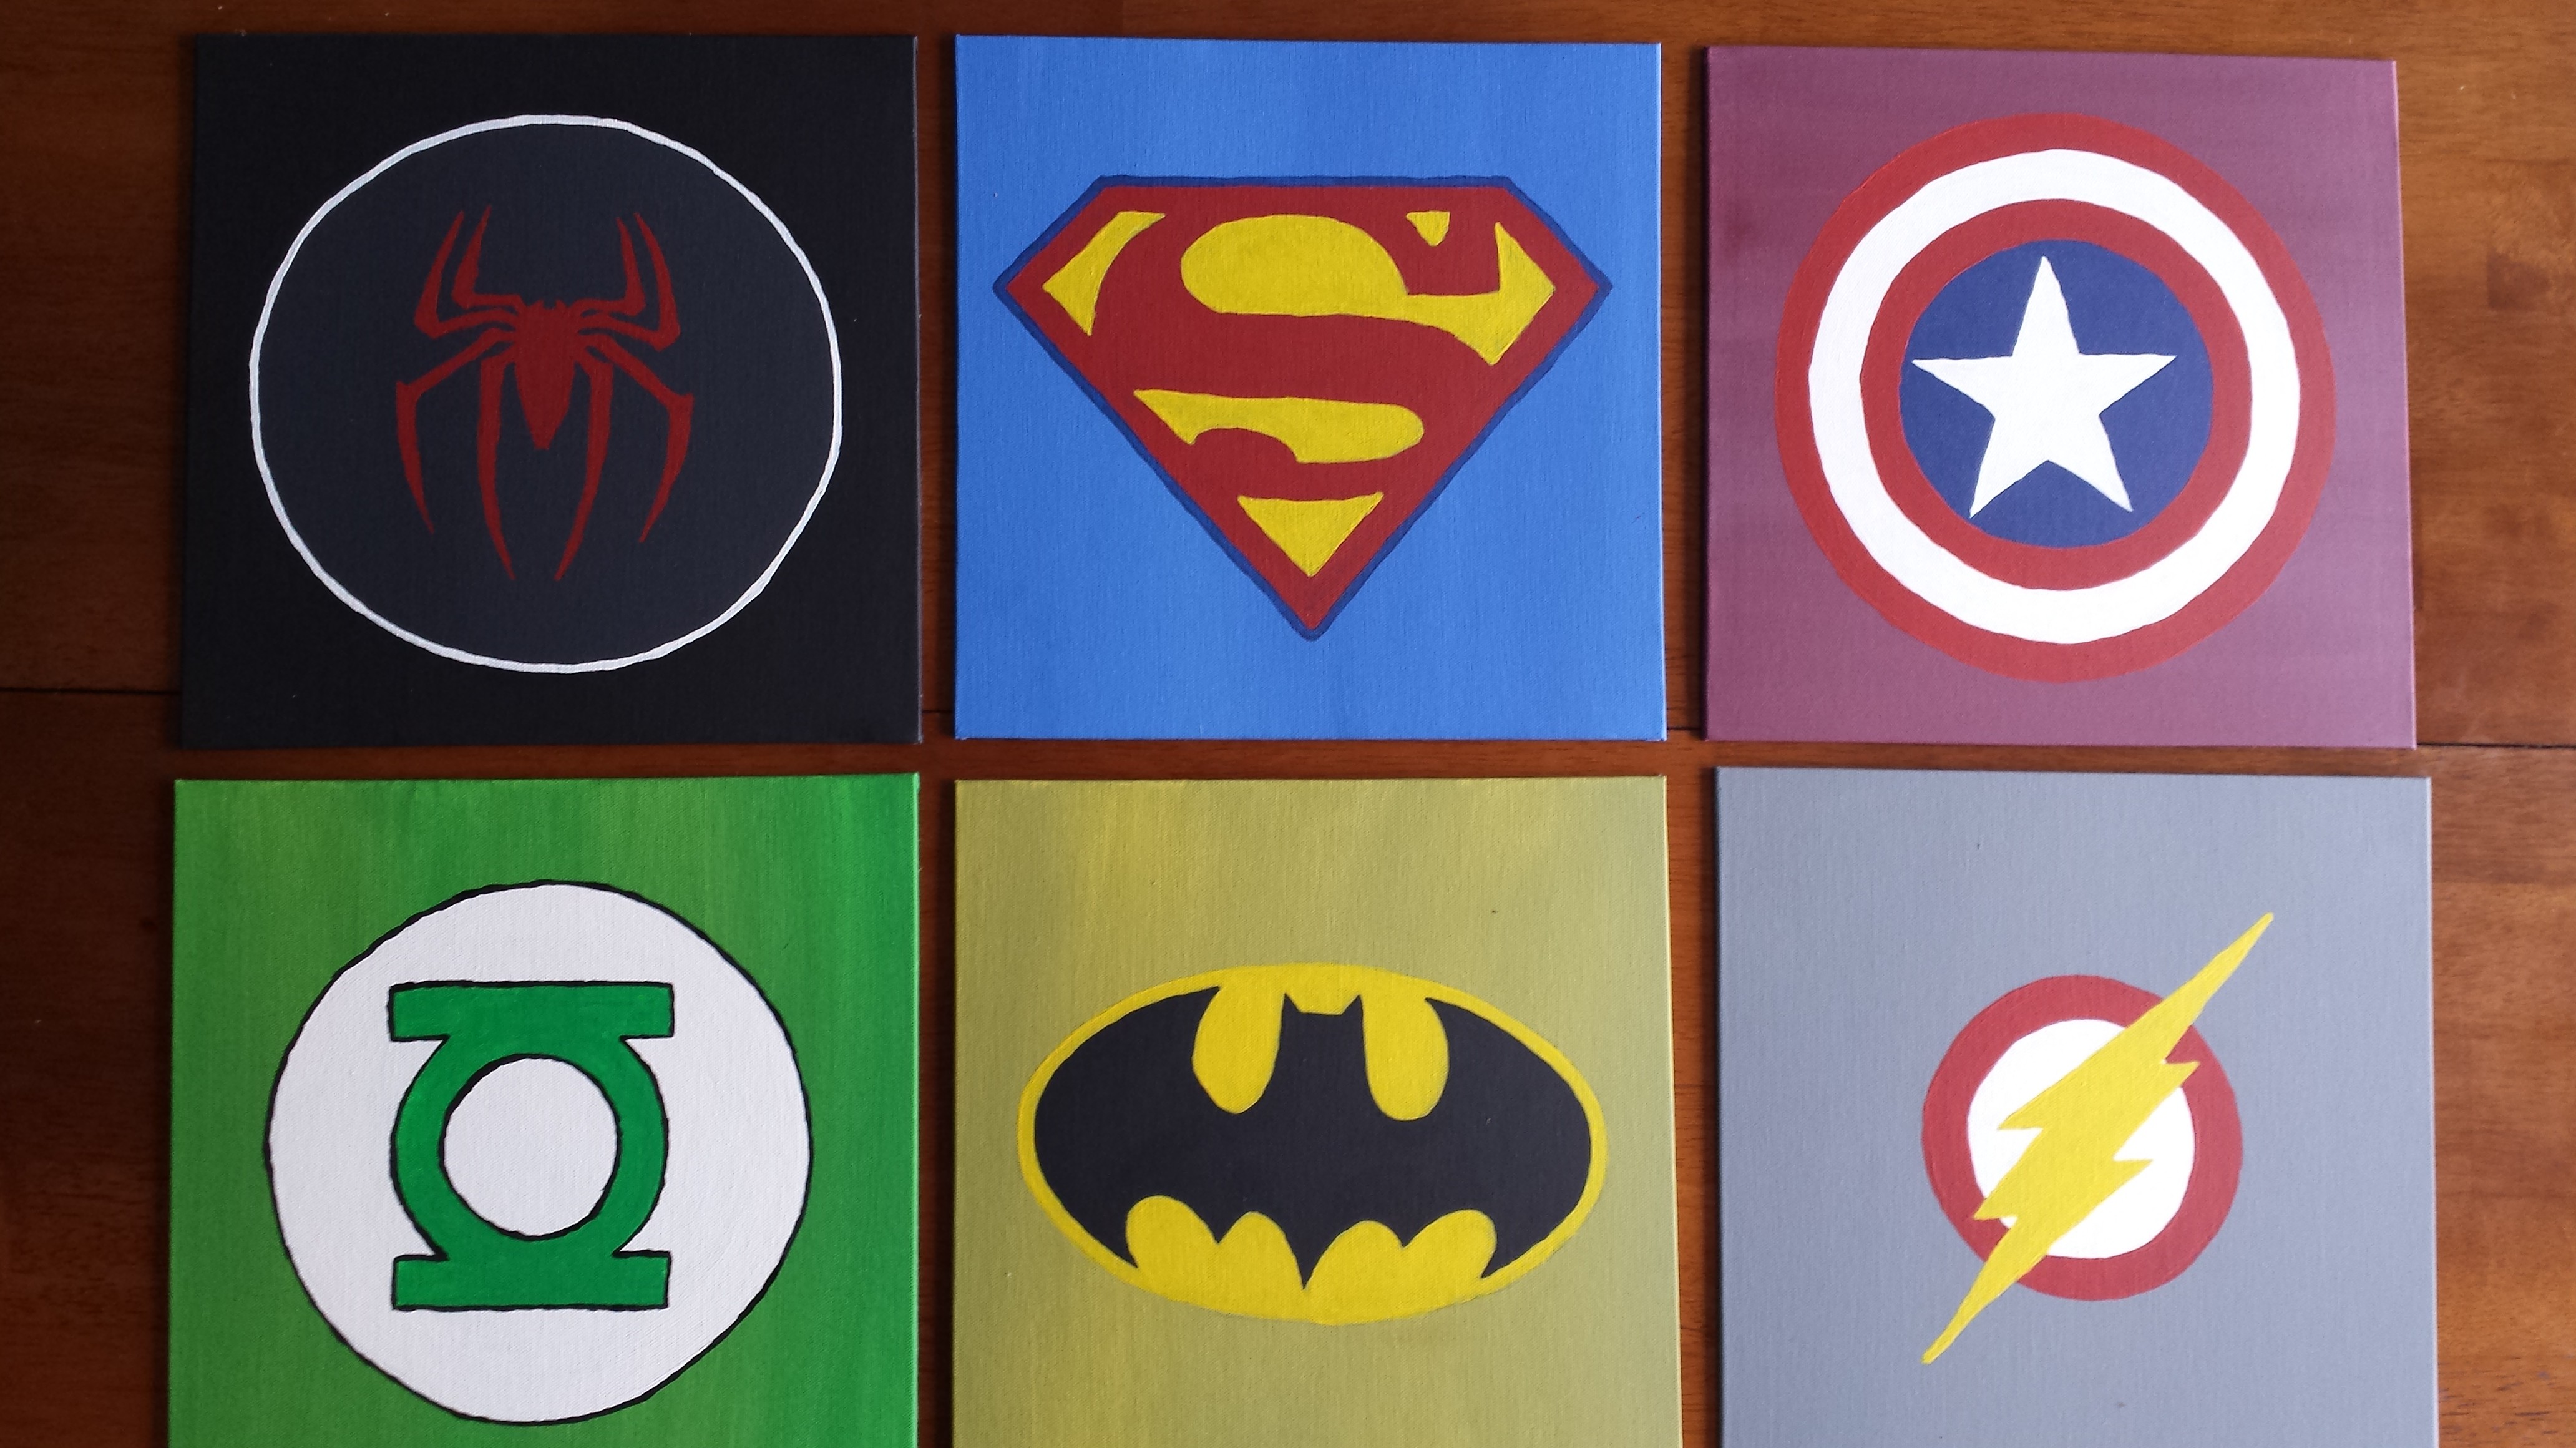 The end result was six superhero logos for my son’s new room and one 